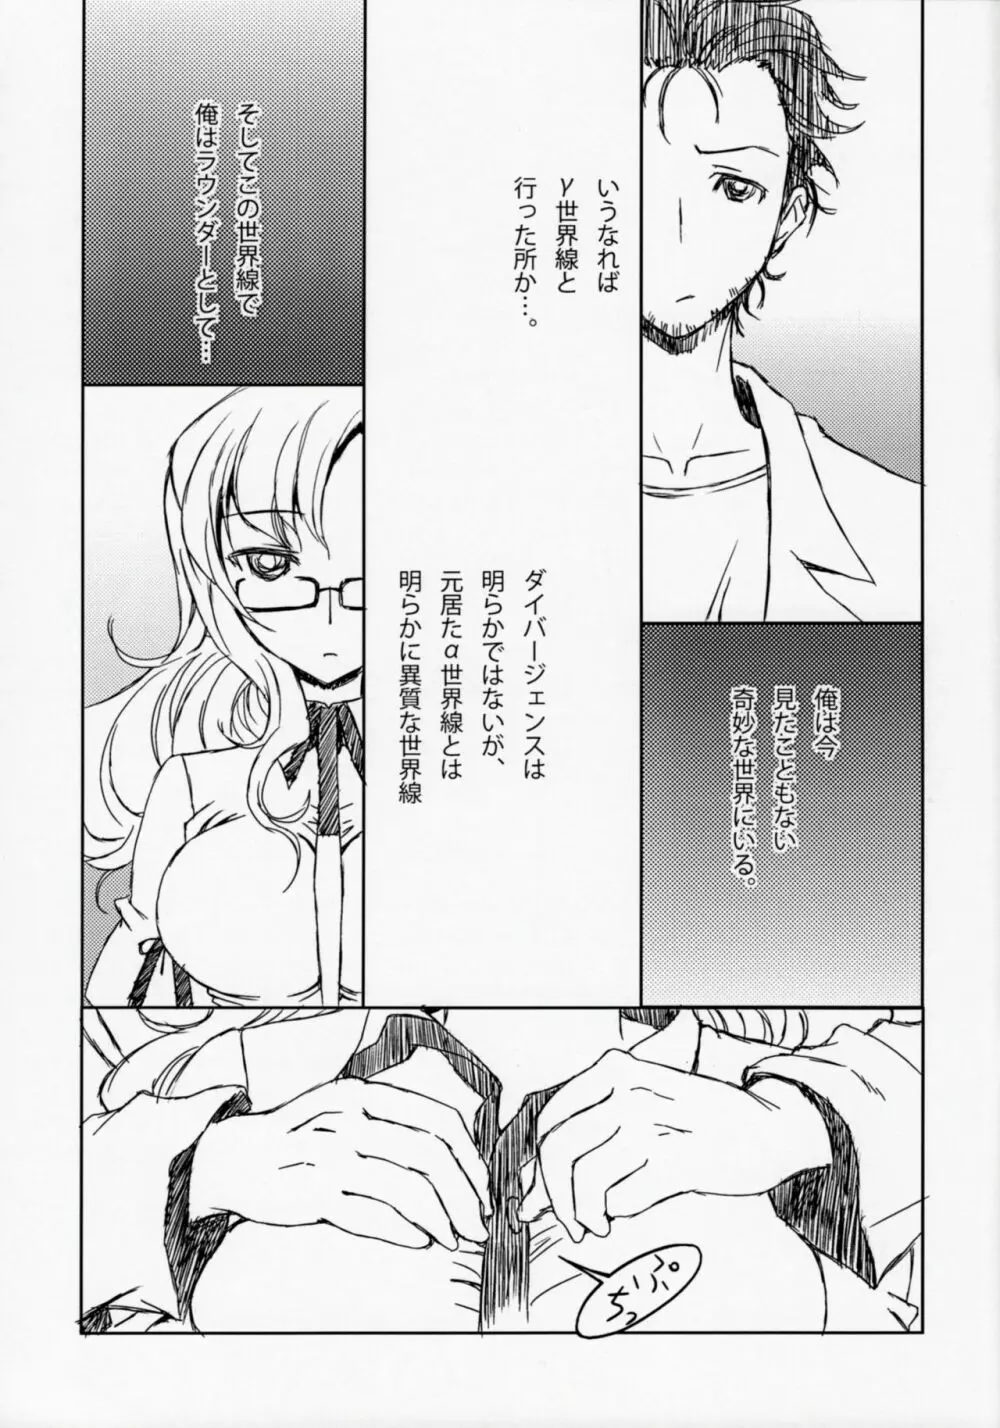 (Chaos;Gate) [LEAM26 (AXiS□) 運命流転のジキル (Steins;Gate) - page2